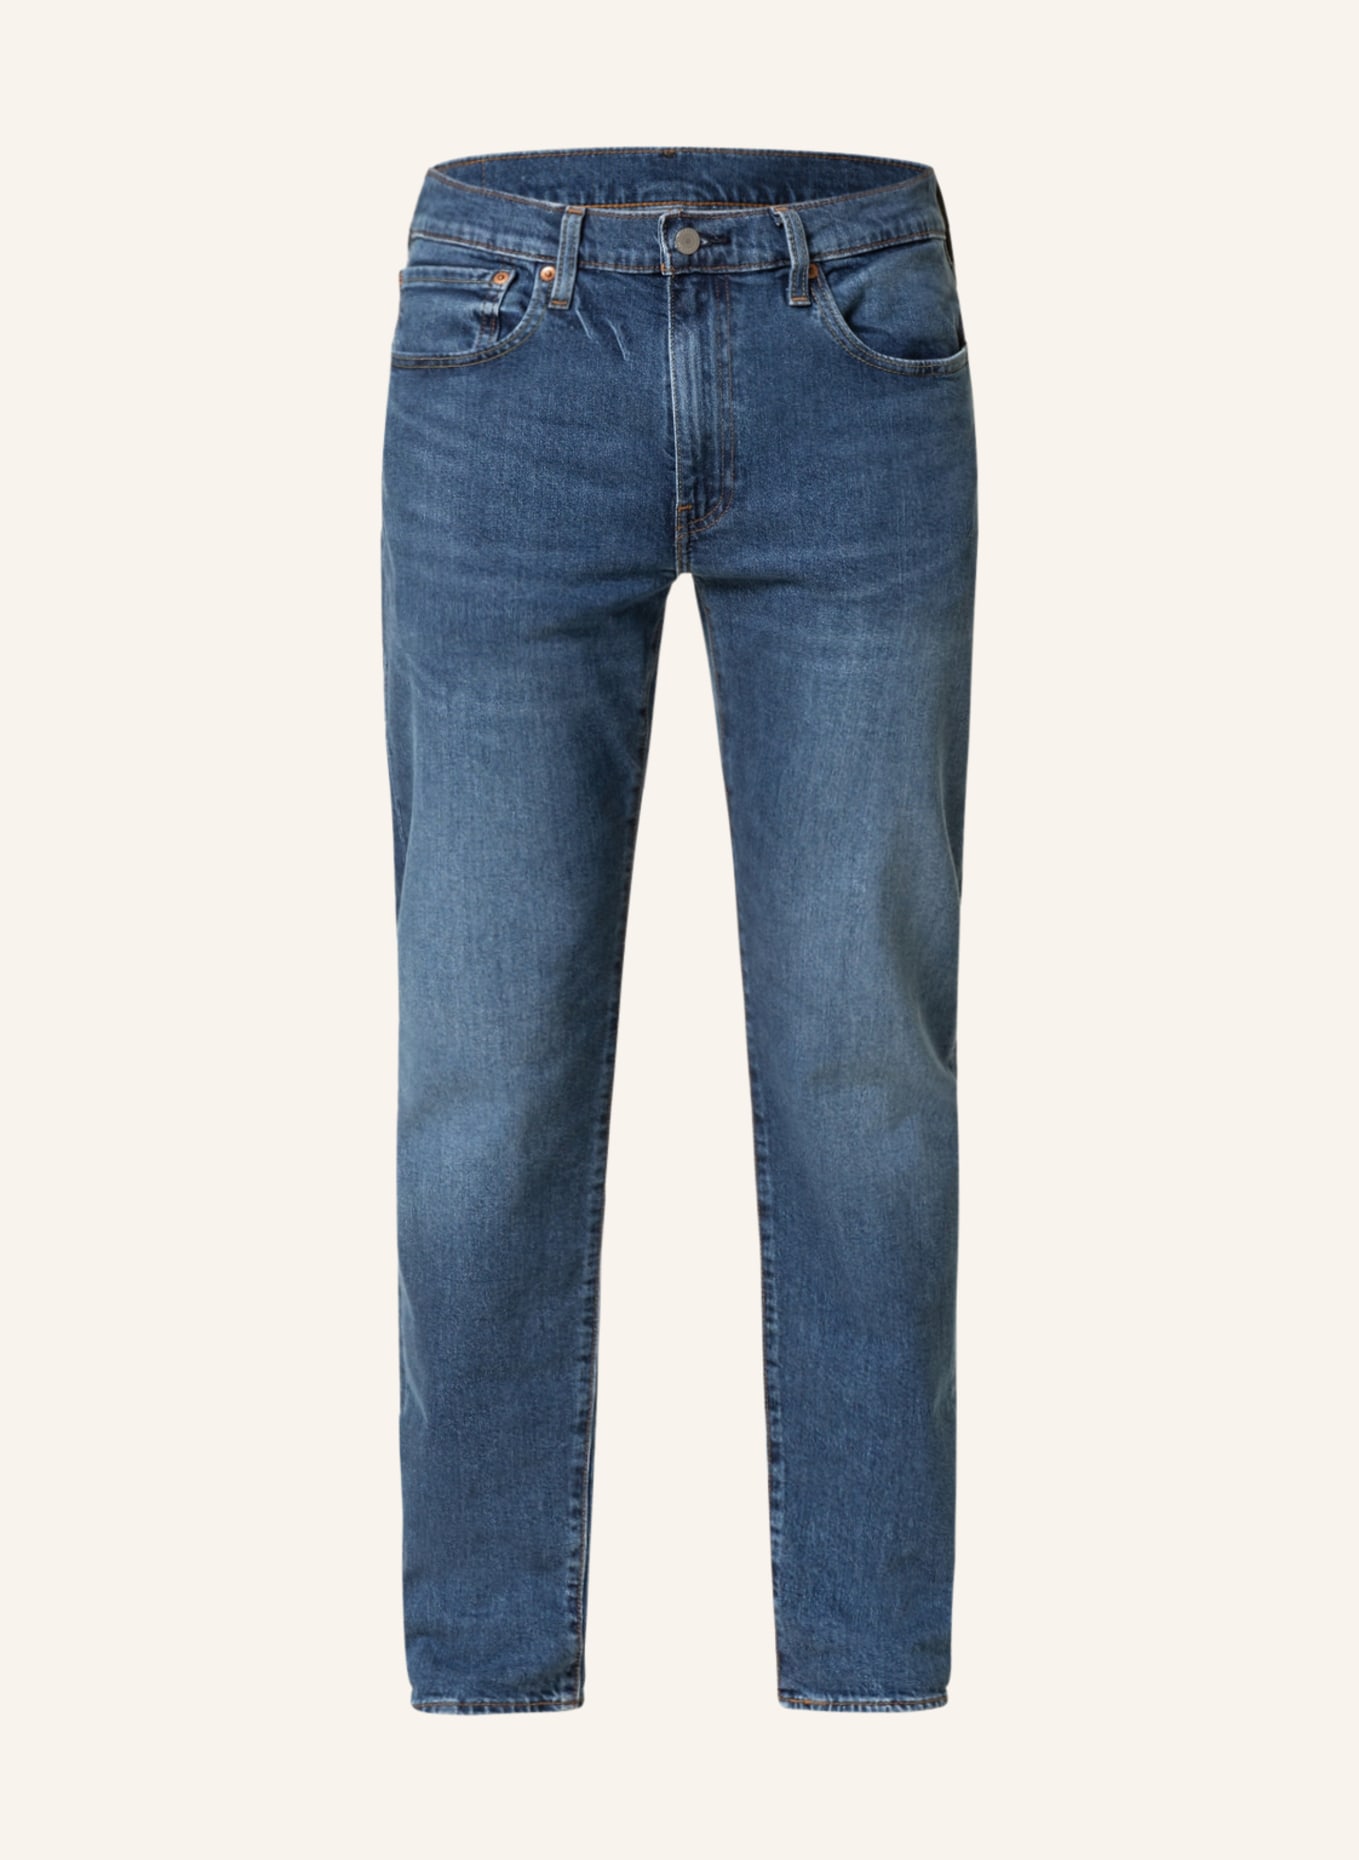 Levi's® Jeans 502 tapered fit, Color: 77 Dark Indigo - Worn In(Image null)